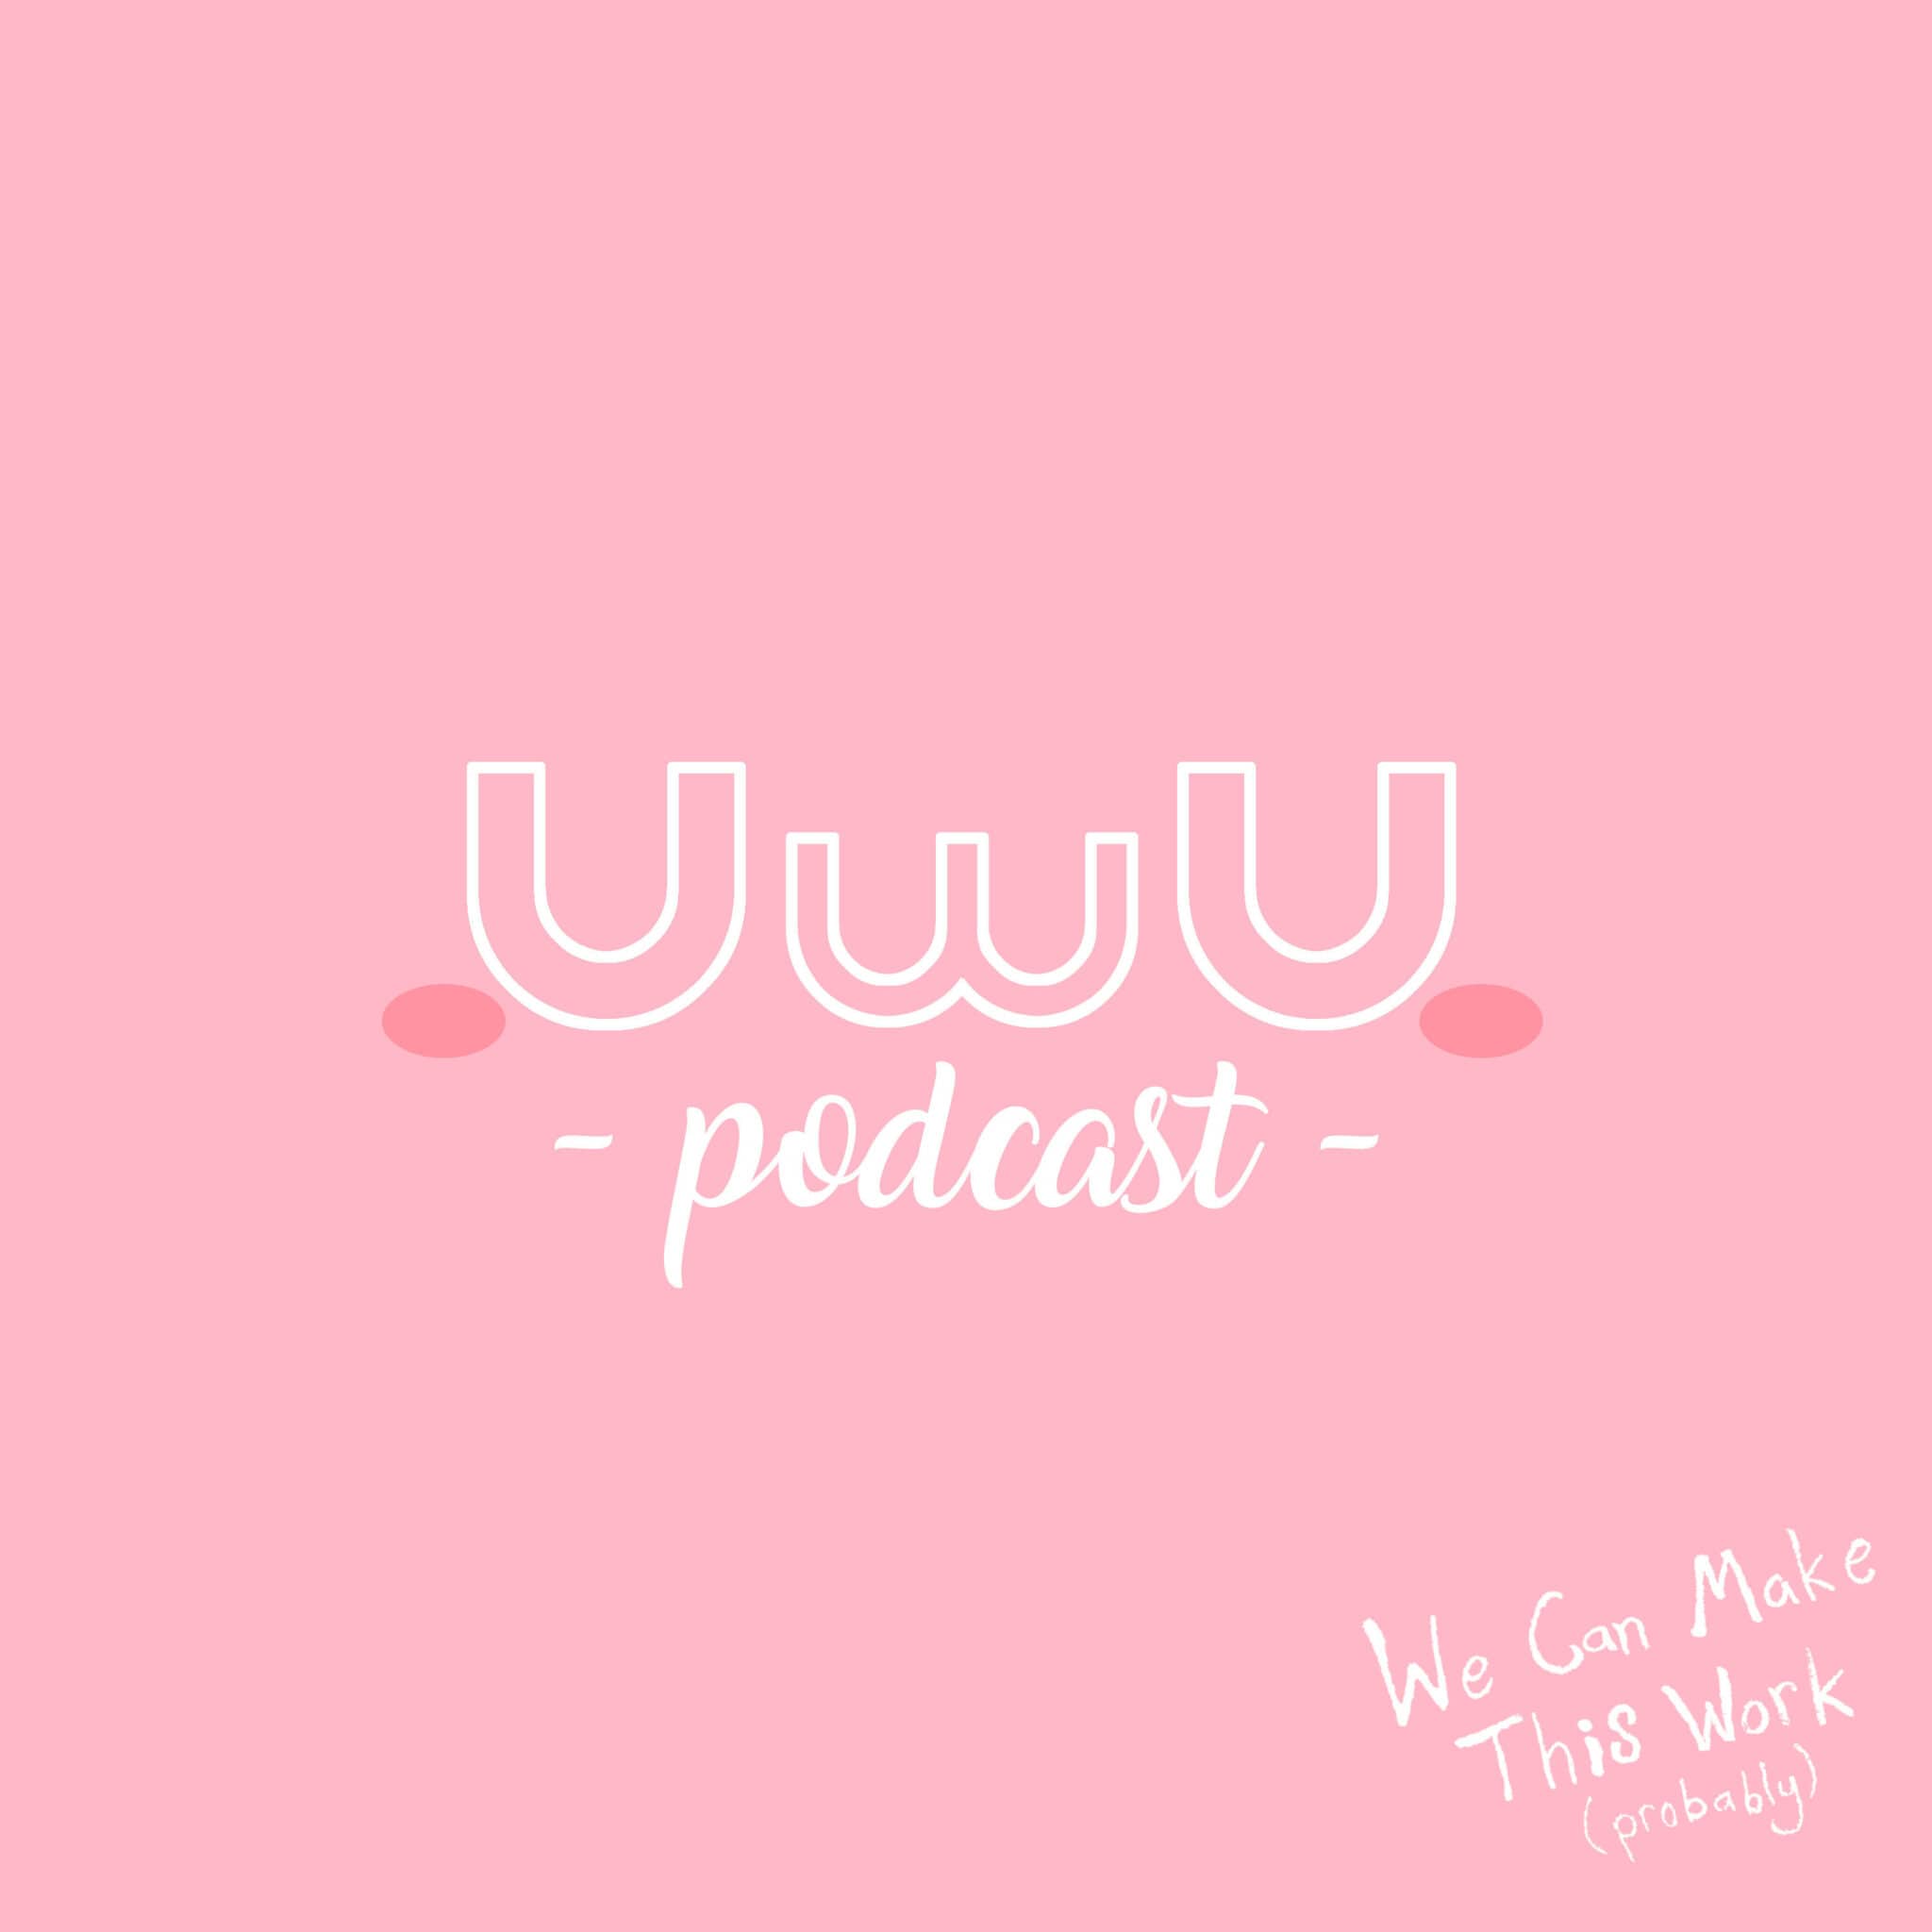 Welcome to the UwU Podcast~